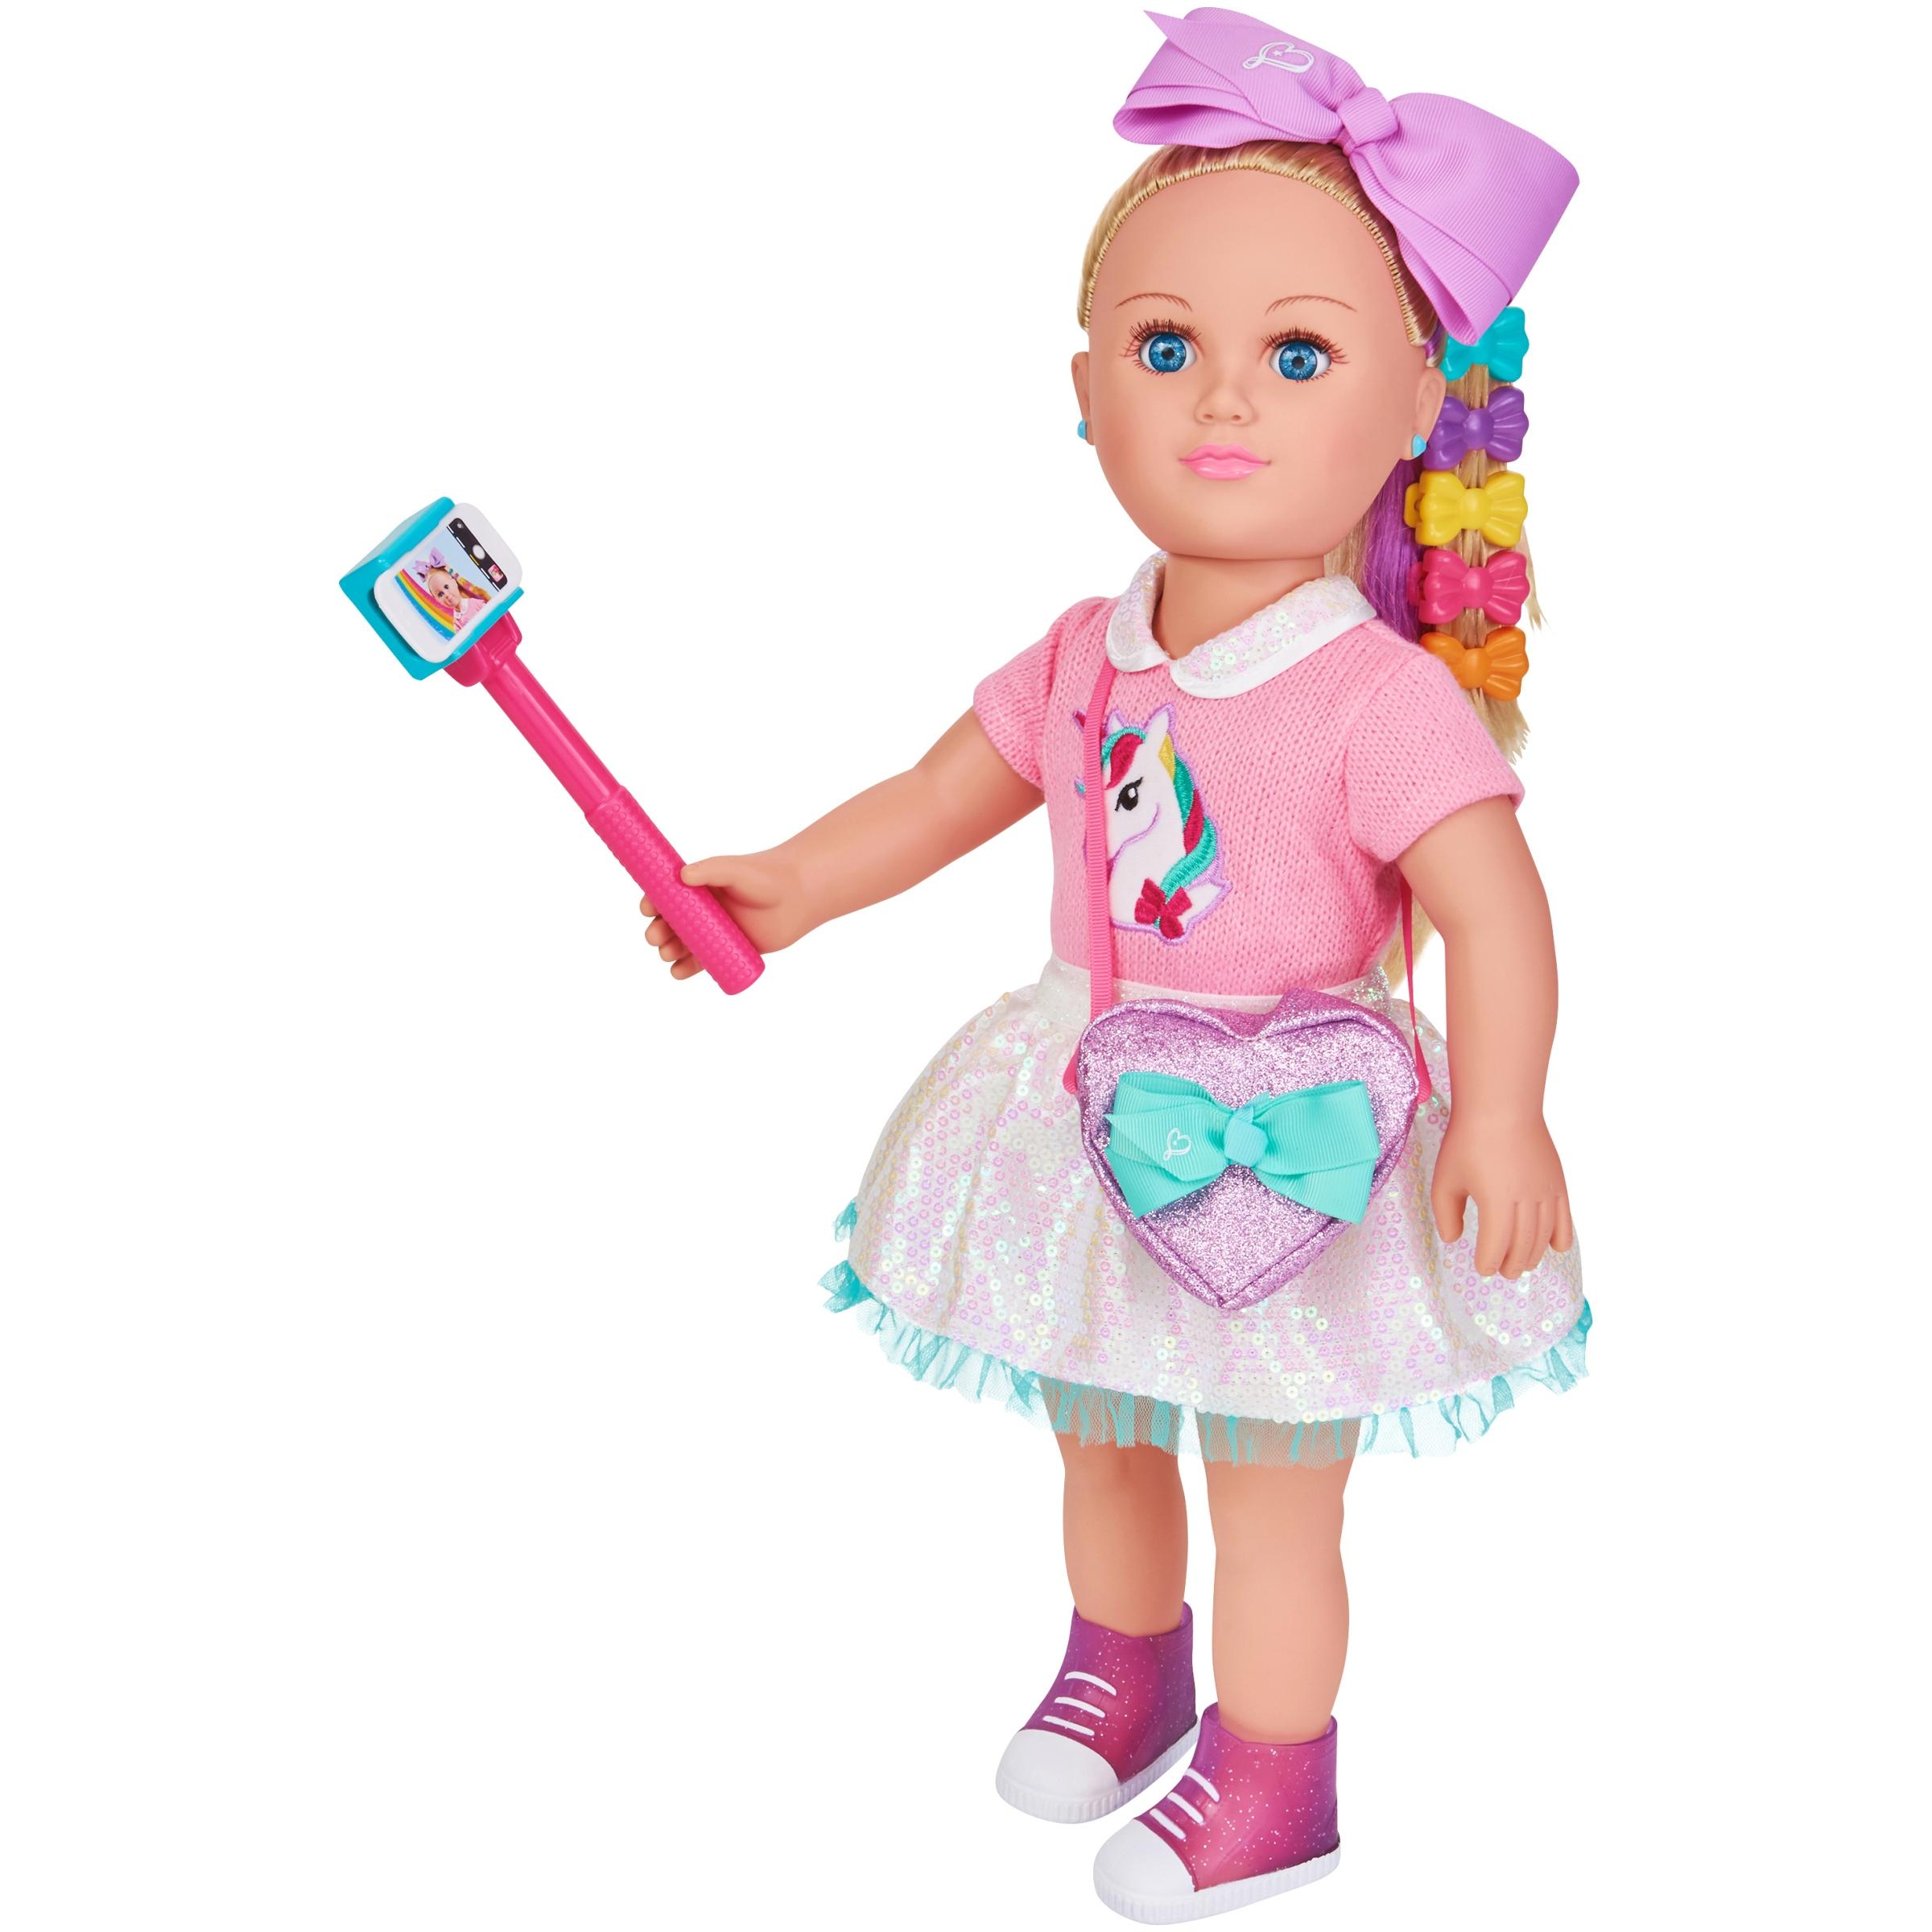 My Life As 18 Poseable JoJo Siwa Doll, Blonde Hair with a Soft